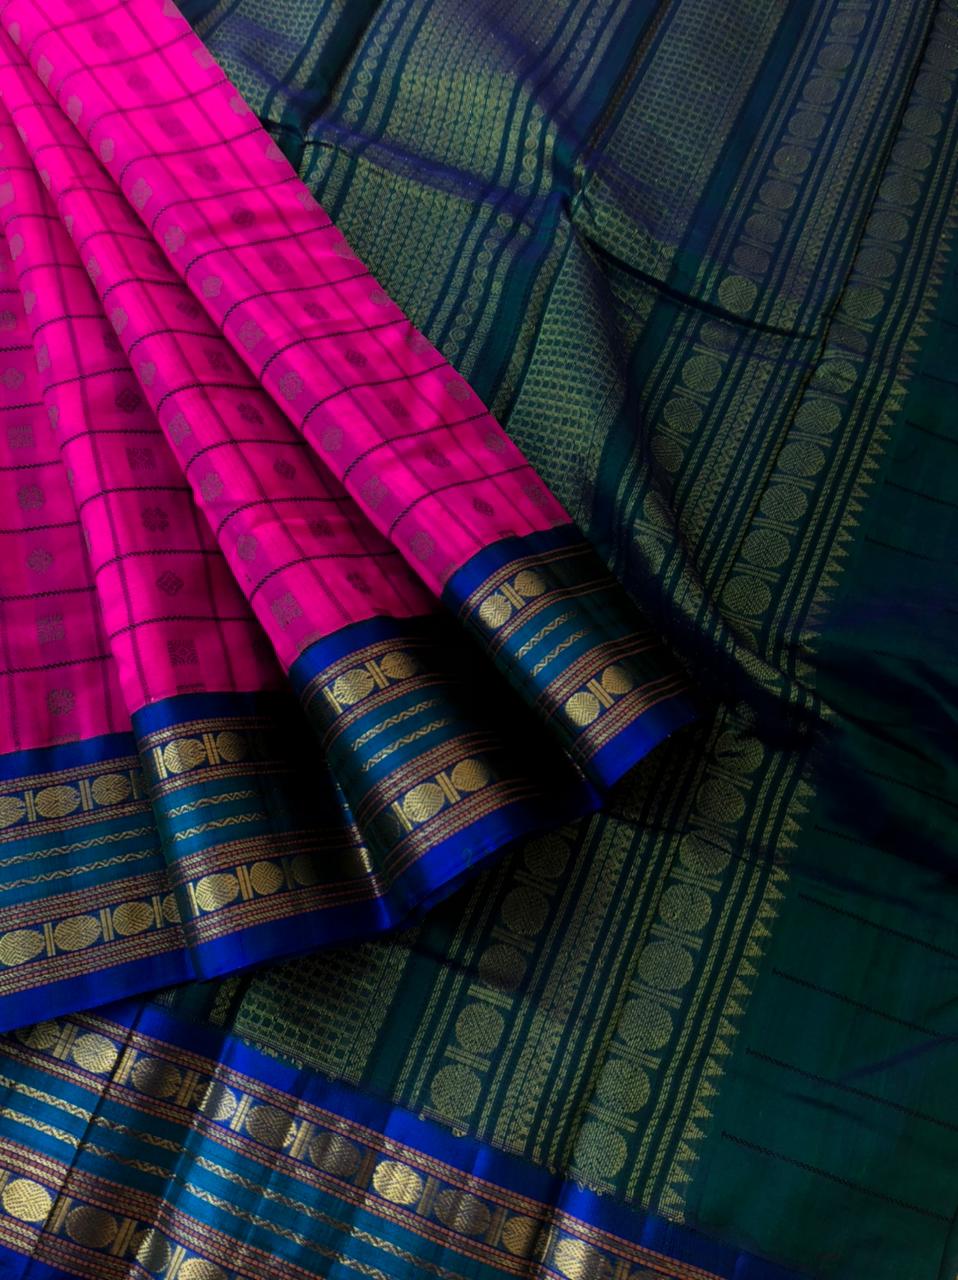 Divyam - Korvai Silk Cotton with Pure Silk Woven Borders - deep Indian pink and deep peacock blue 1000 buttas